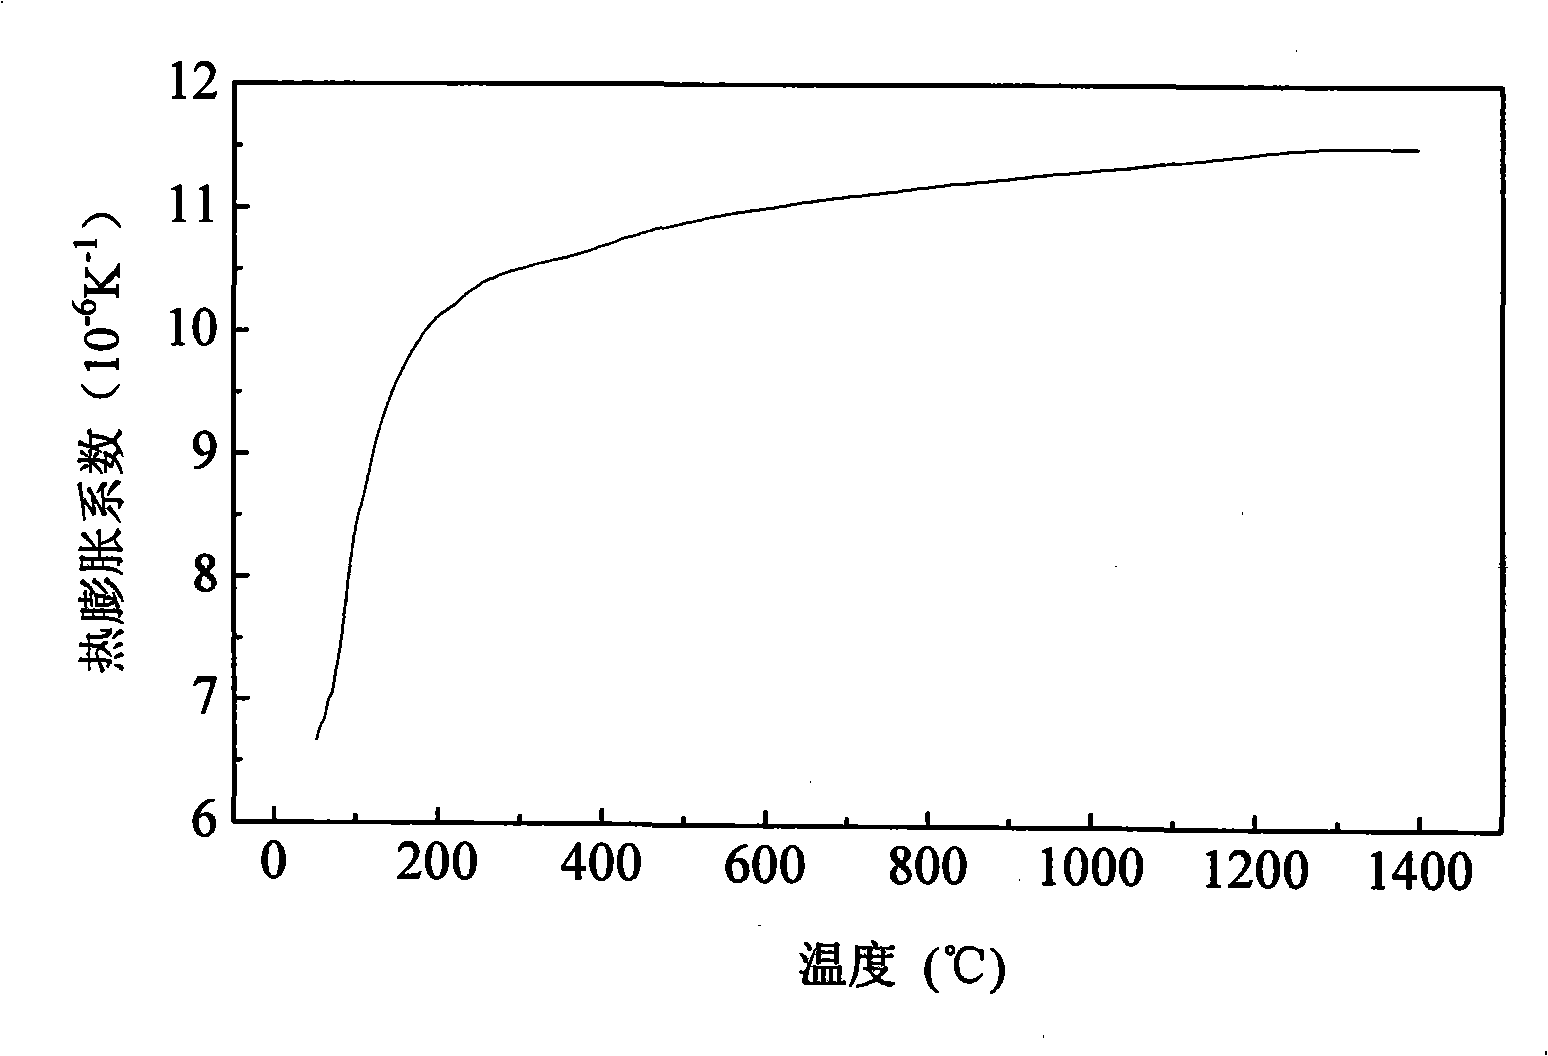 Composite rare earth zirconate thermal barrier coating ceramic material and preparation method thereof